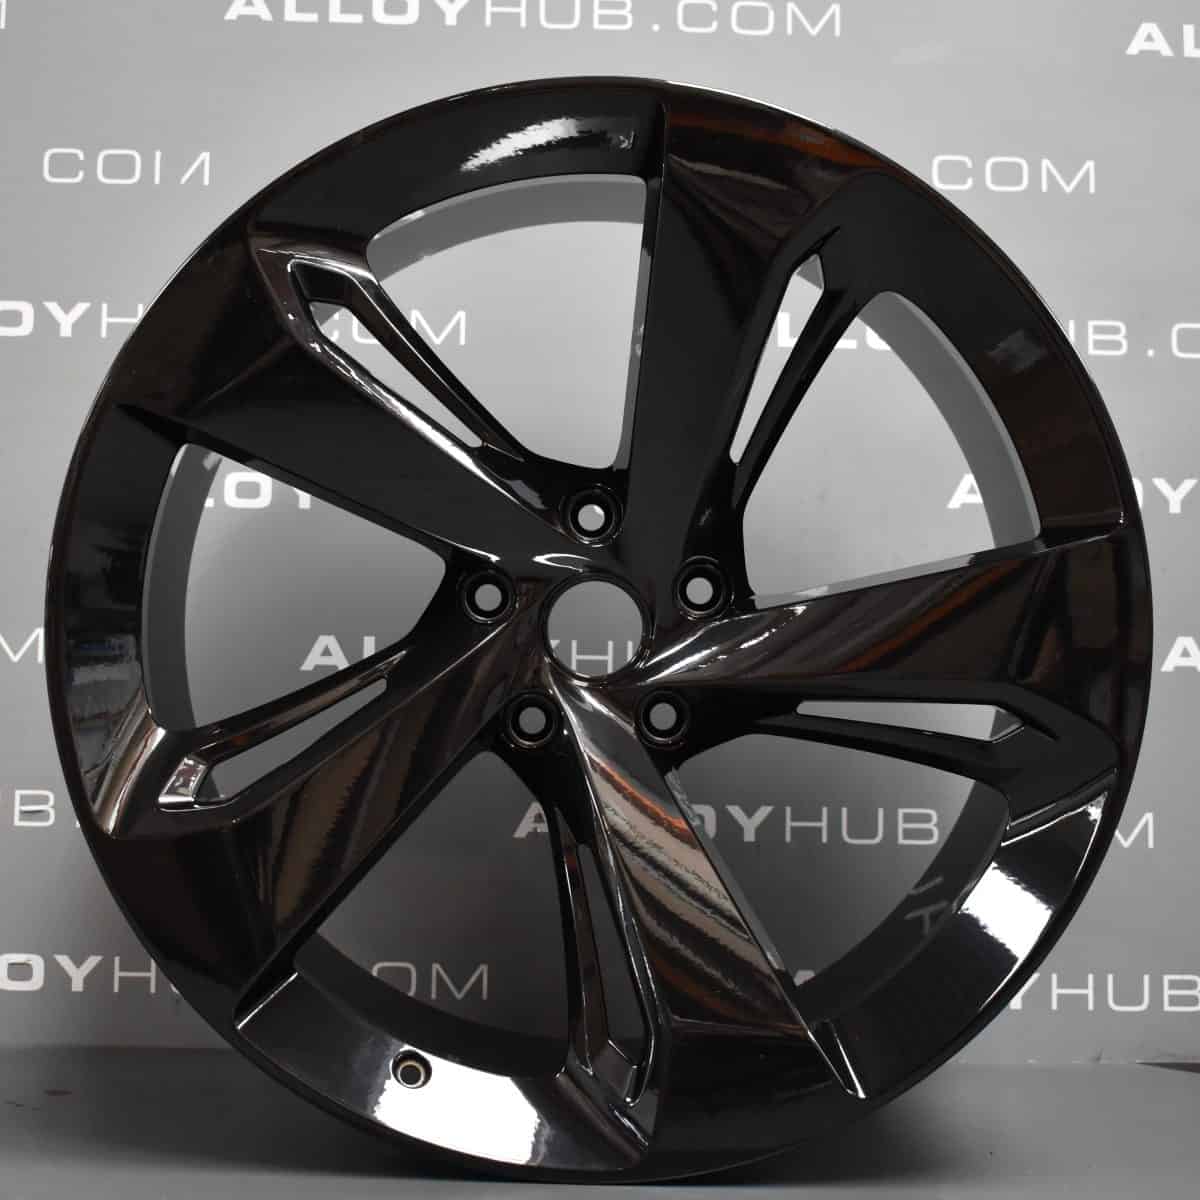 Genuine Bentley Bentayga 5 Spoke 22" Inch Alloy Wheels with Gloss Black Finish 3A601025D, 36A601025G